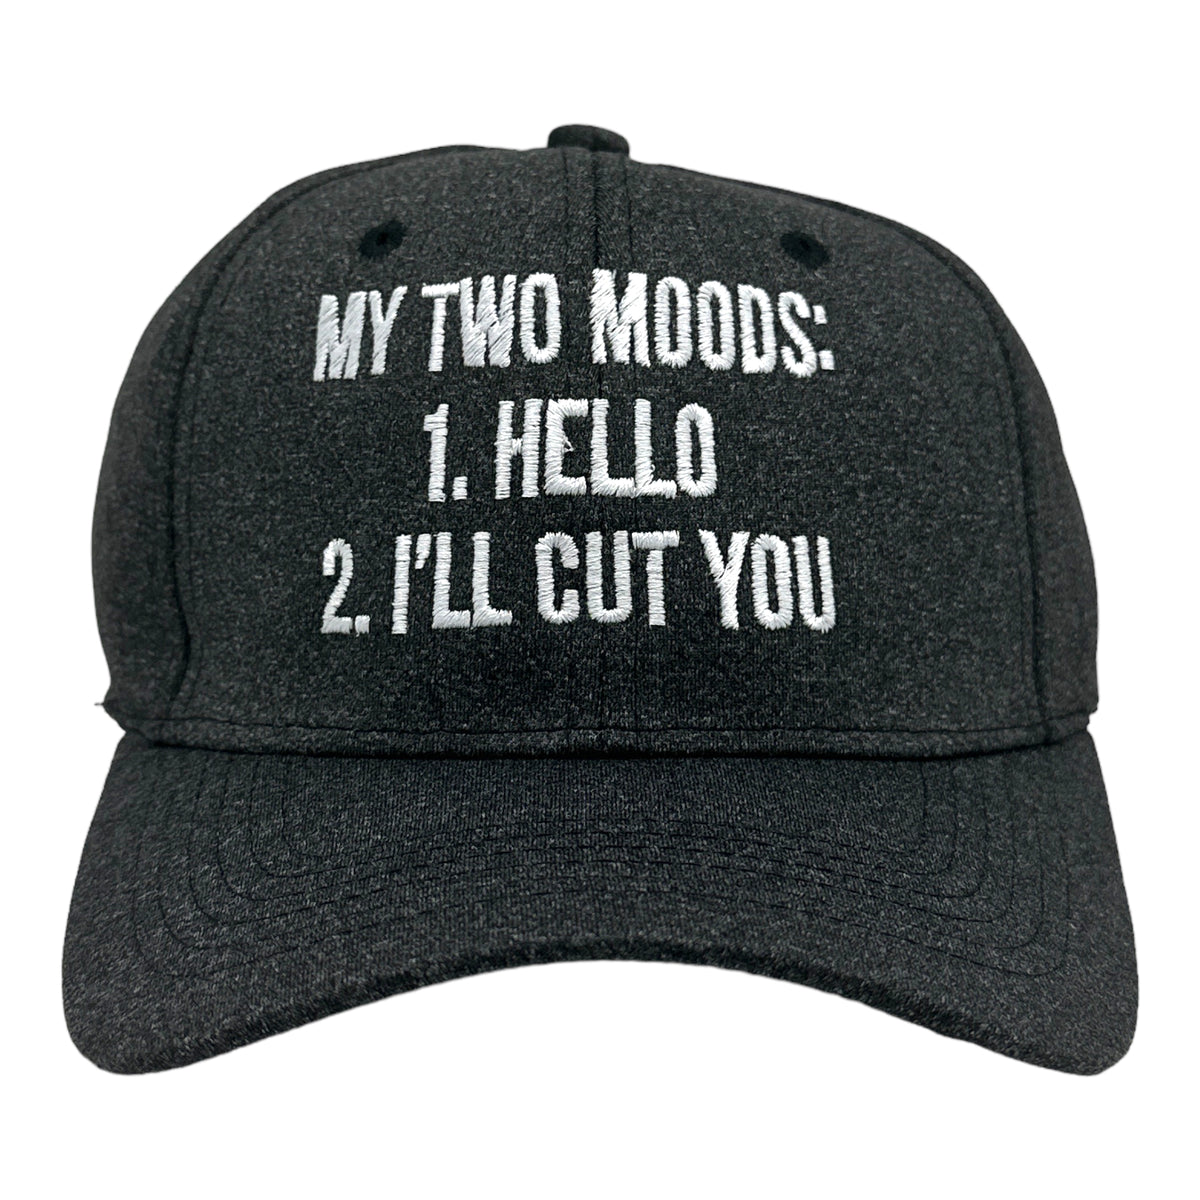 Funny Black - TWOMOODS My Two Moods Hello Ill Cut You Nerdy Sarcastic Tee